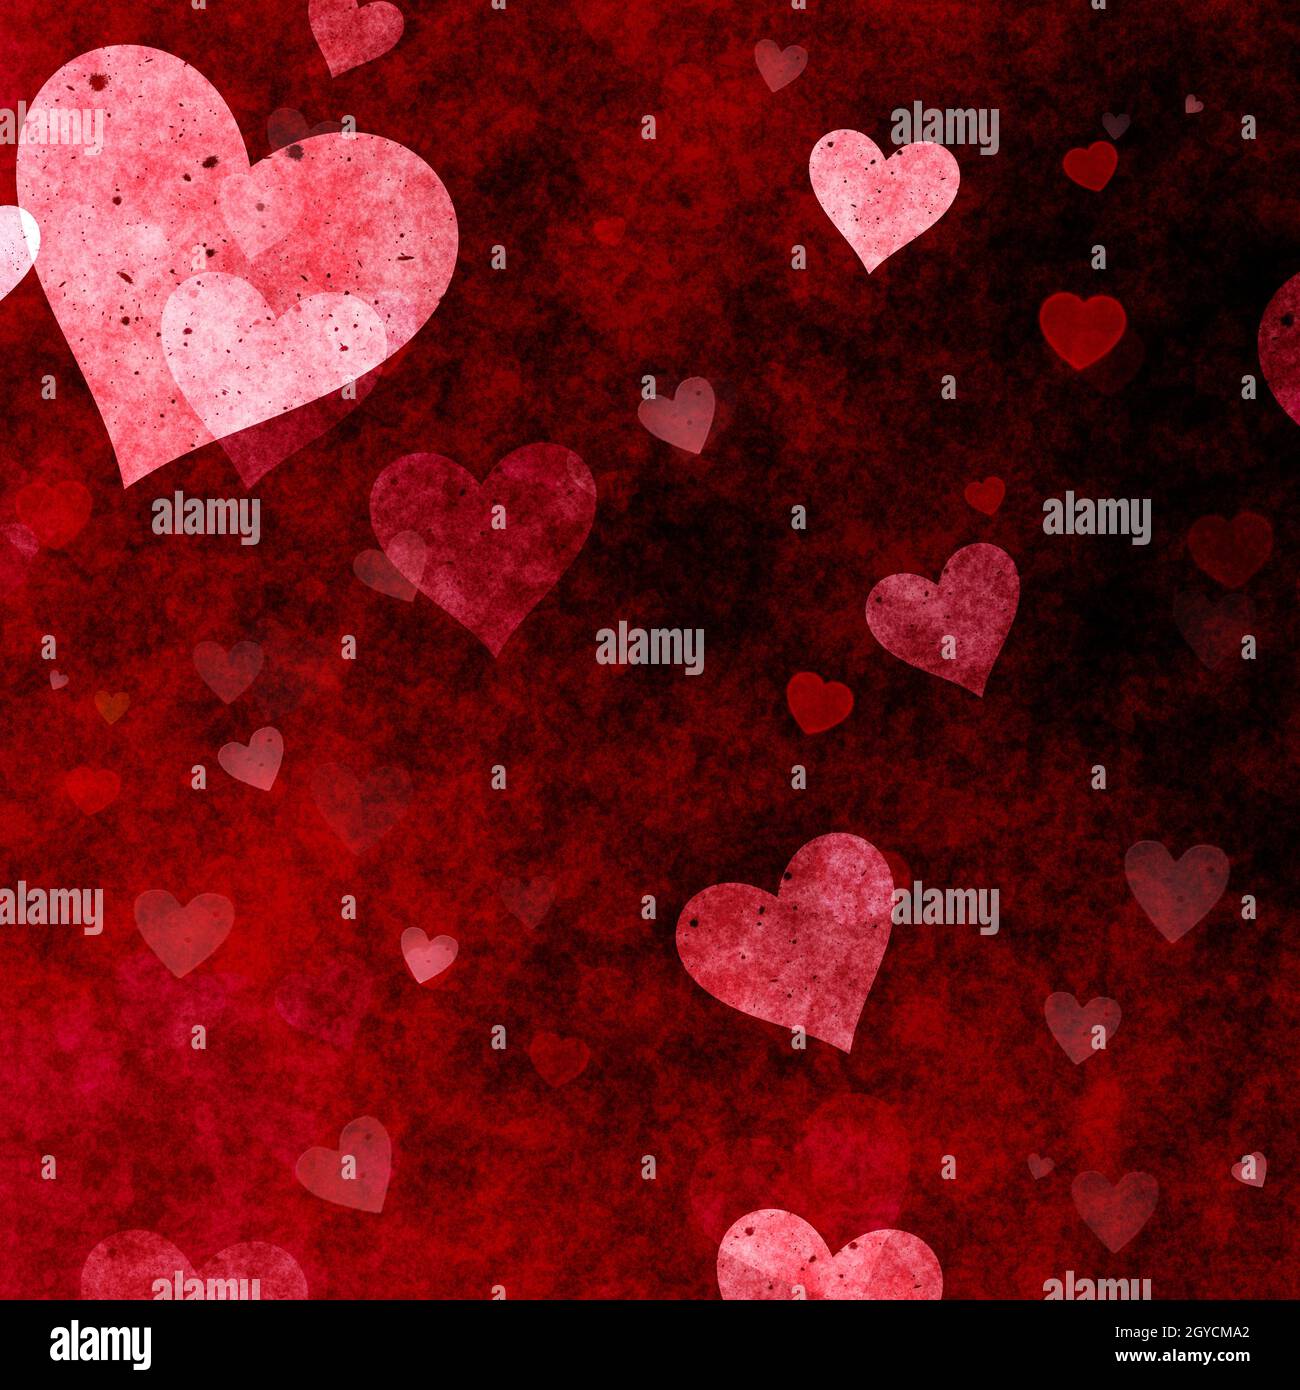 Valentines Day background with grunge hearts design Stock Photo - Alamy